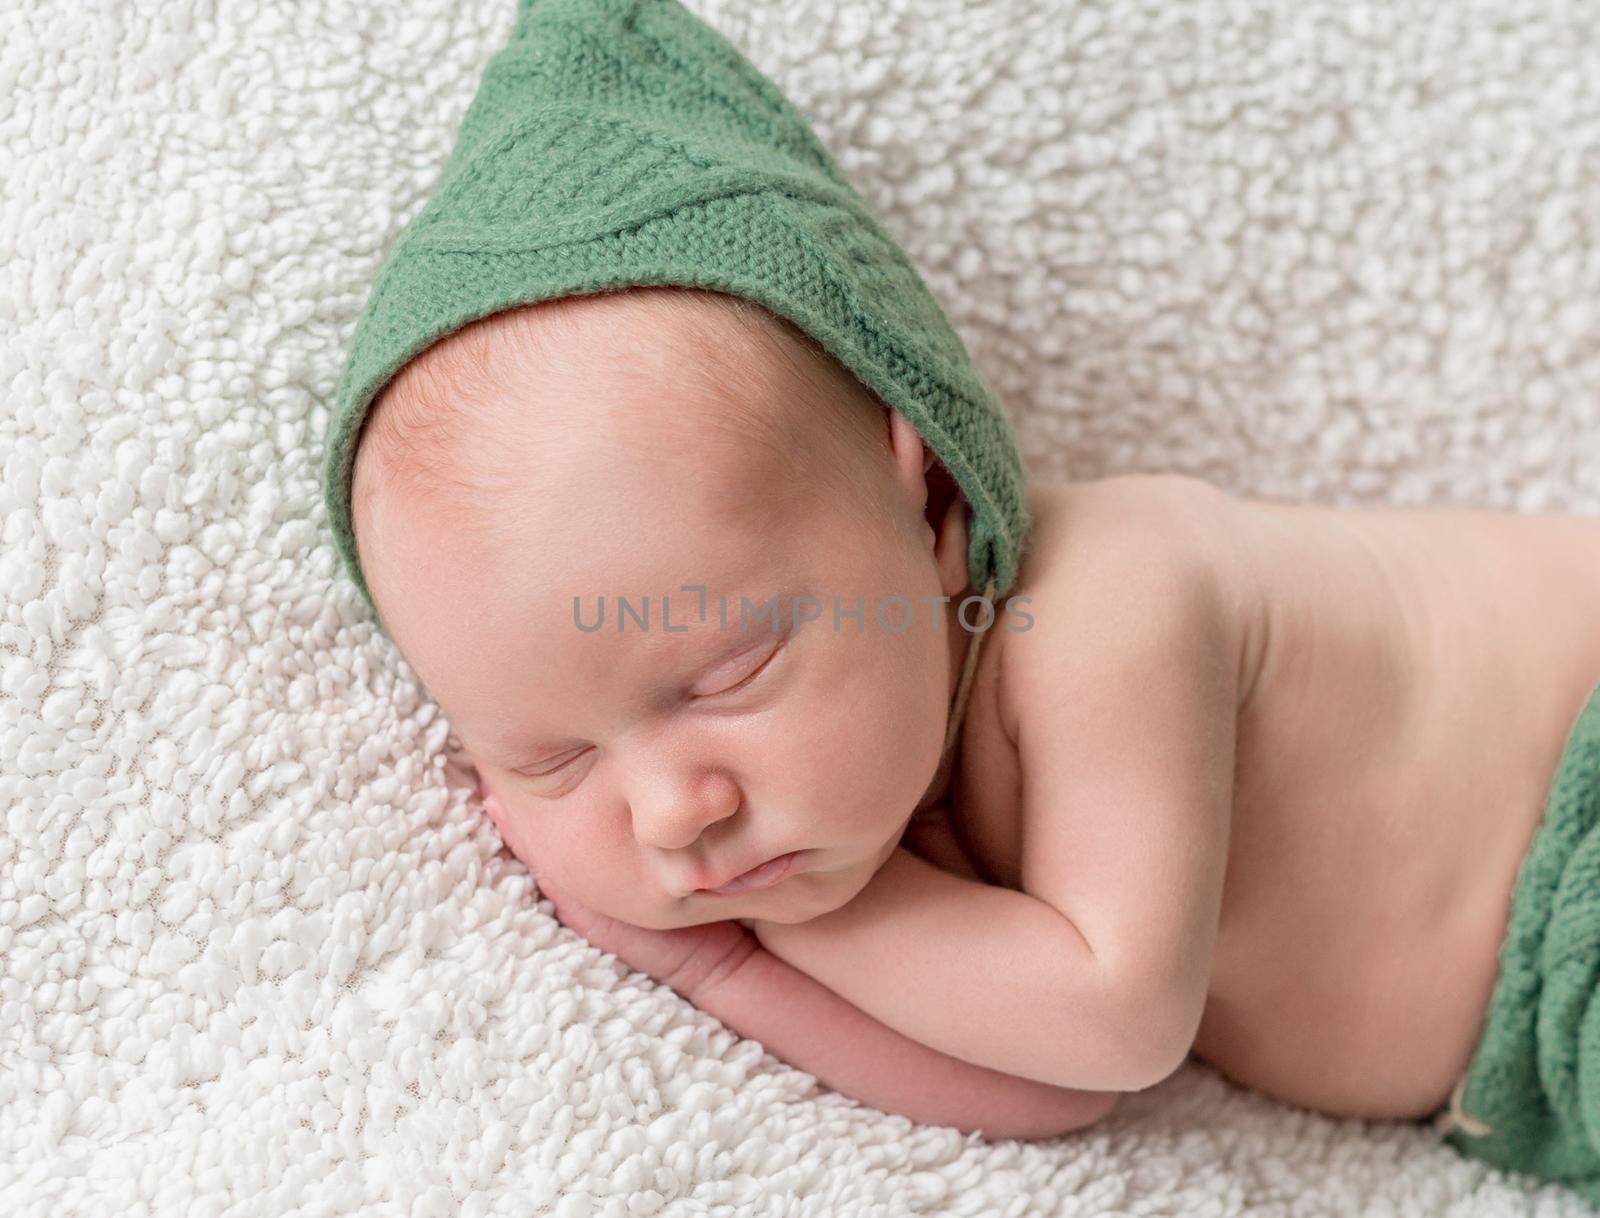 cute newborn sleeping in green elf hat and panties on soft white blanket close-up